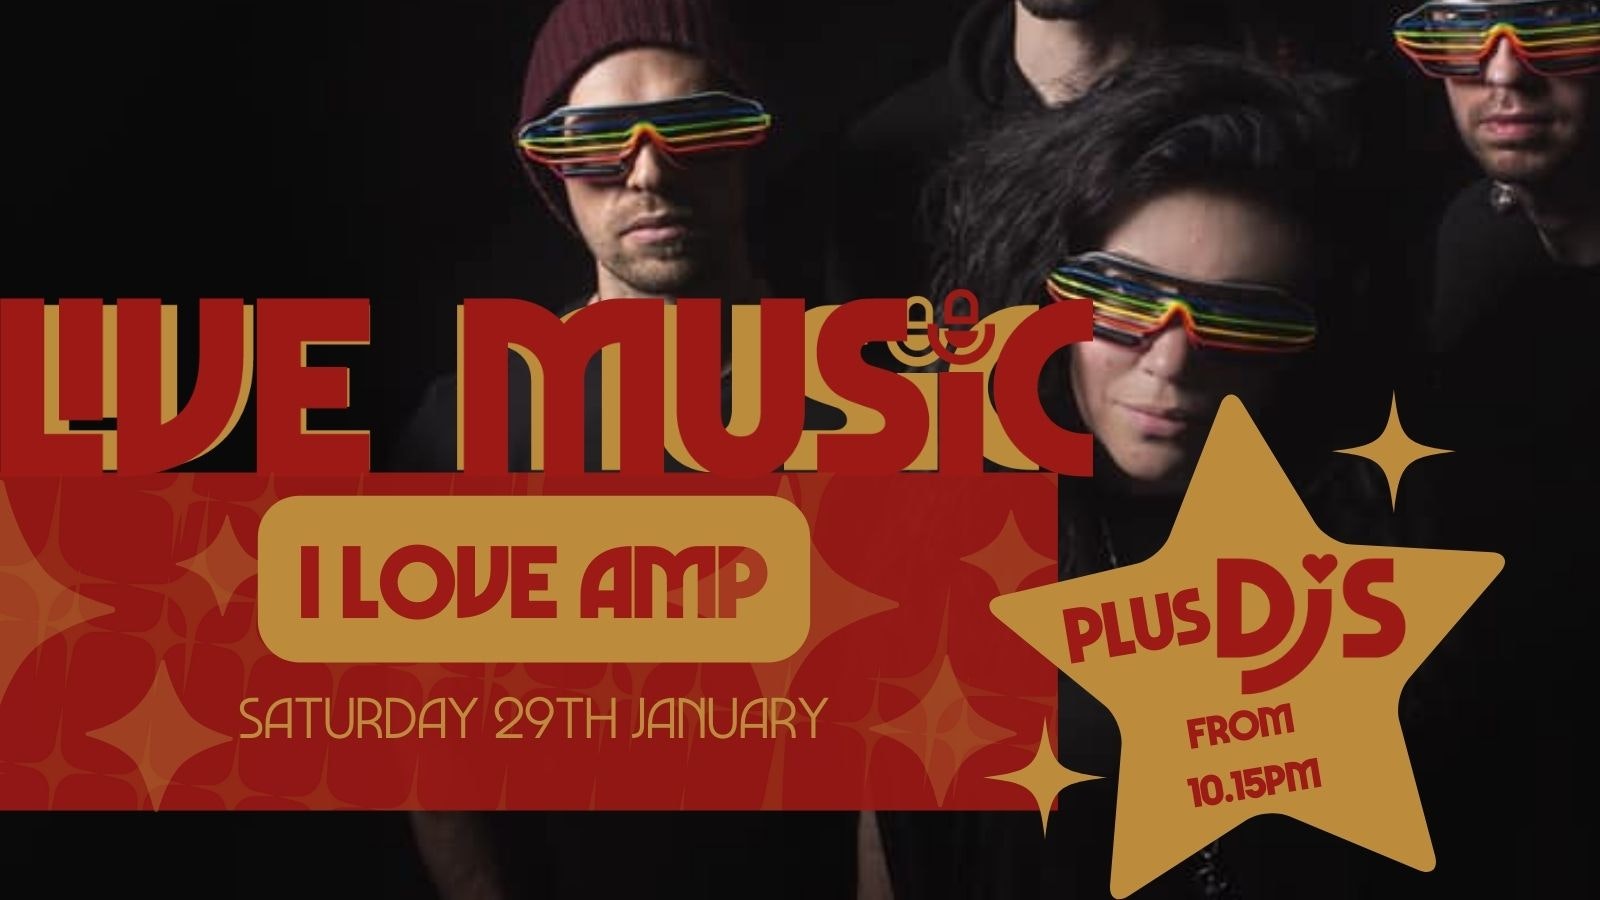 Live Music: I LOVE AMP // Annabel’s Cabaret & Discotheque, Plymouth